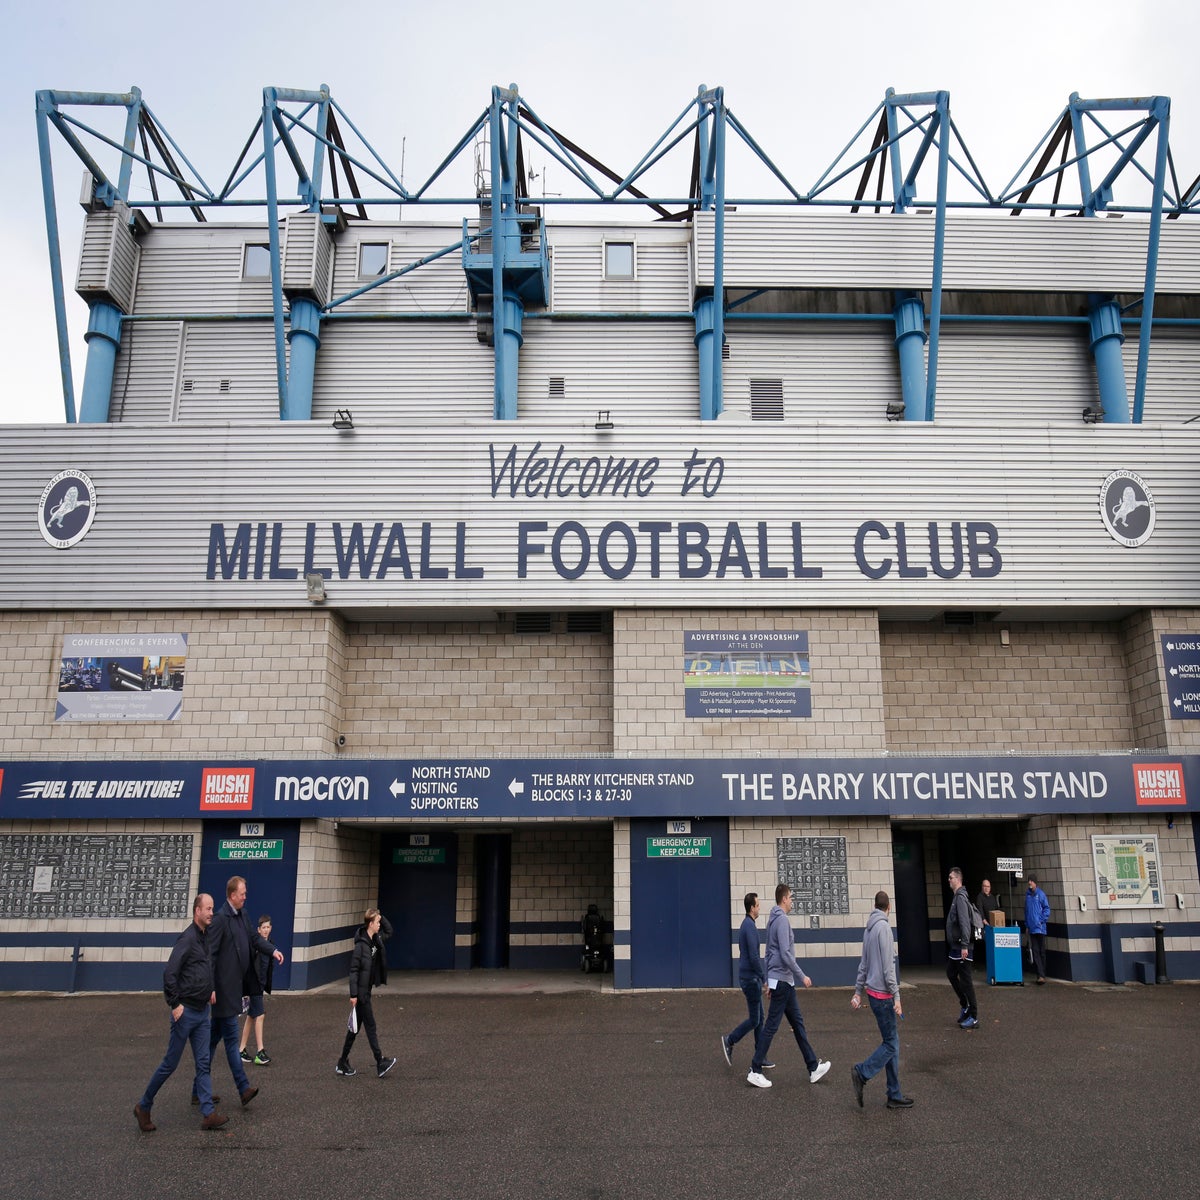 Cardiff City vs Millwall LIVE: Championship result, final score and reaction